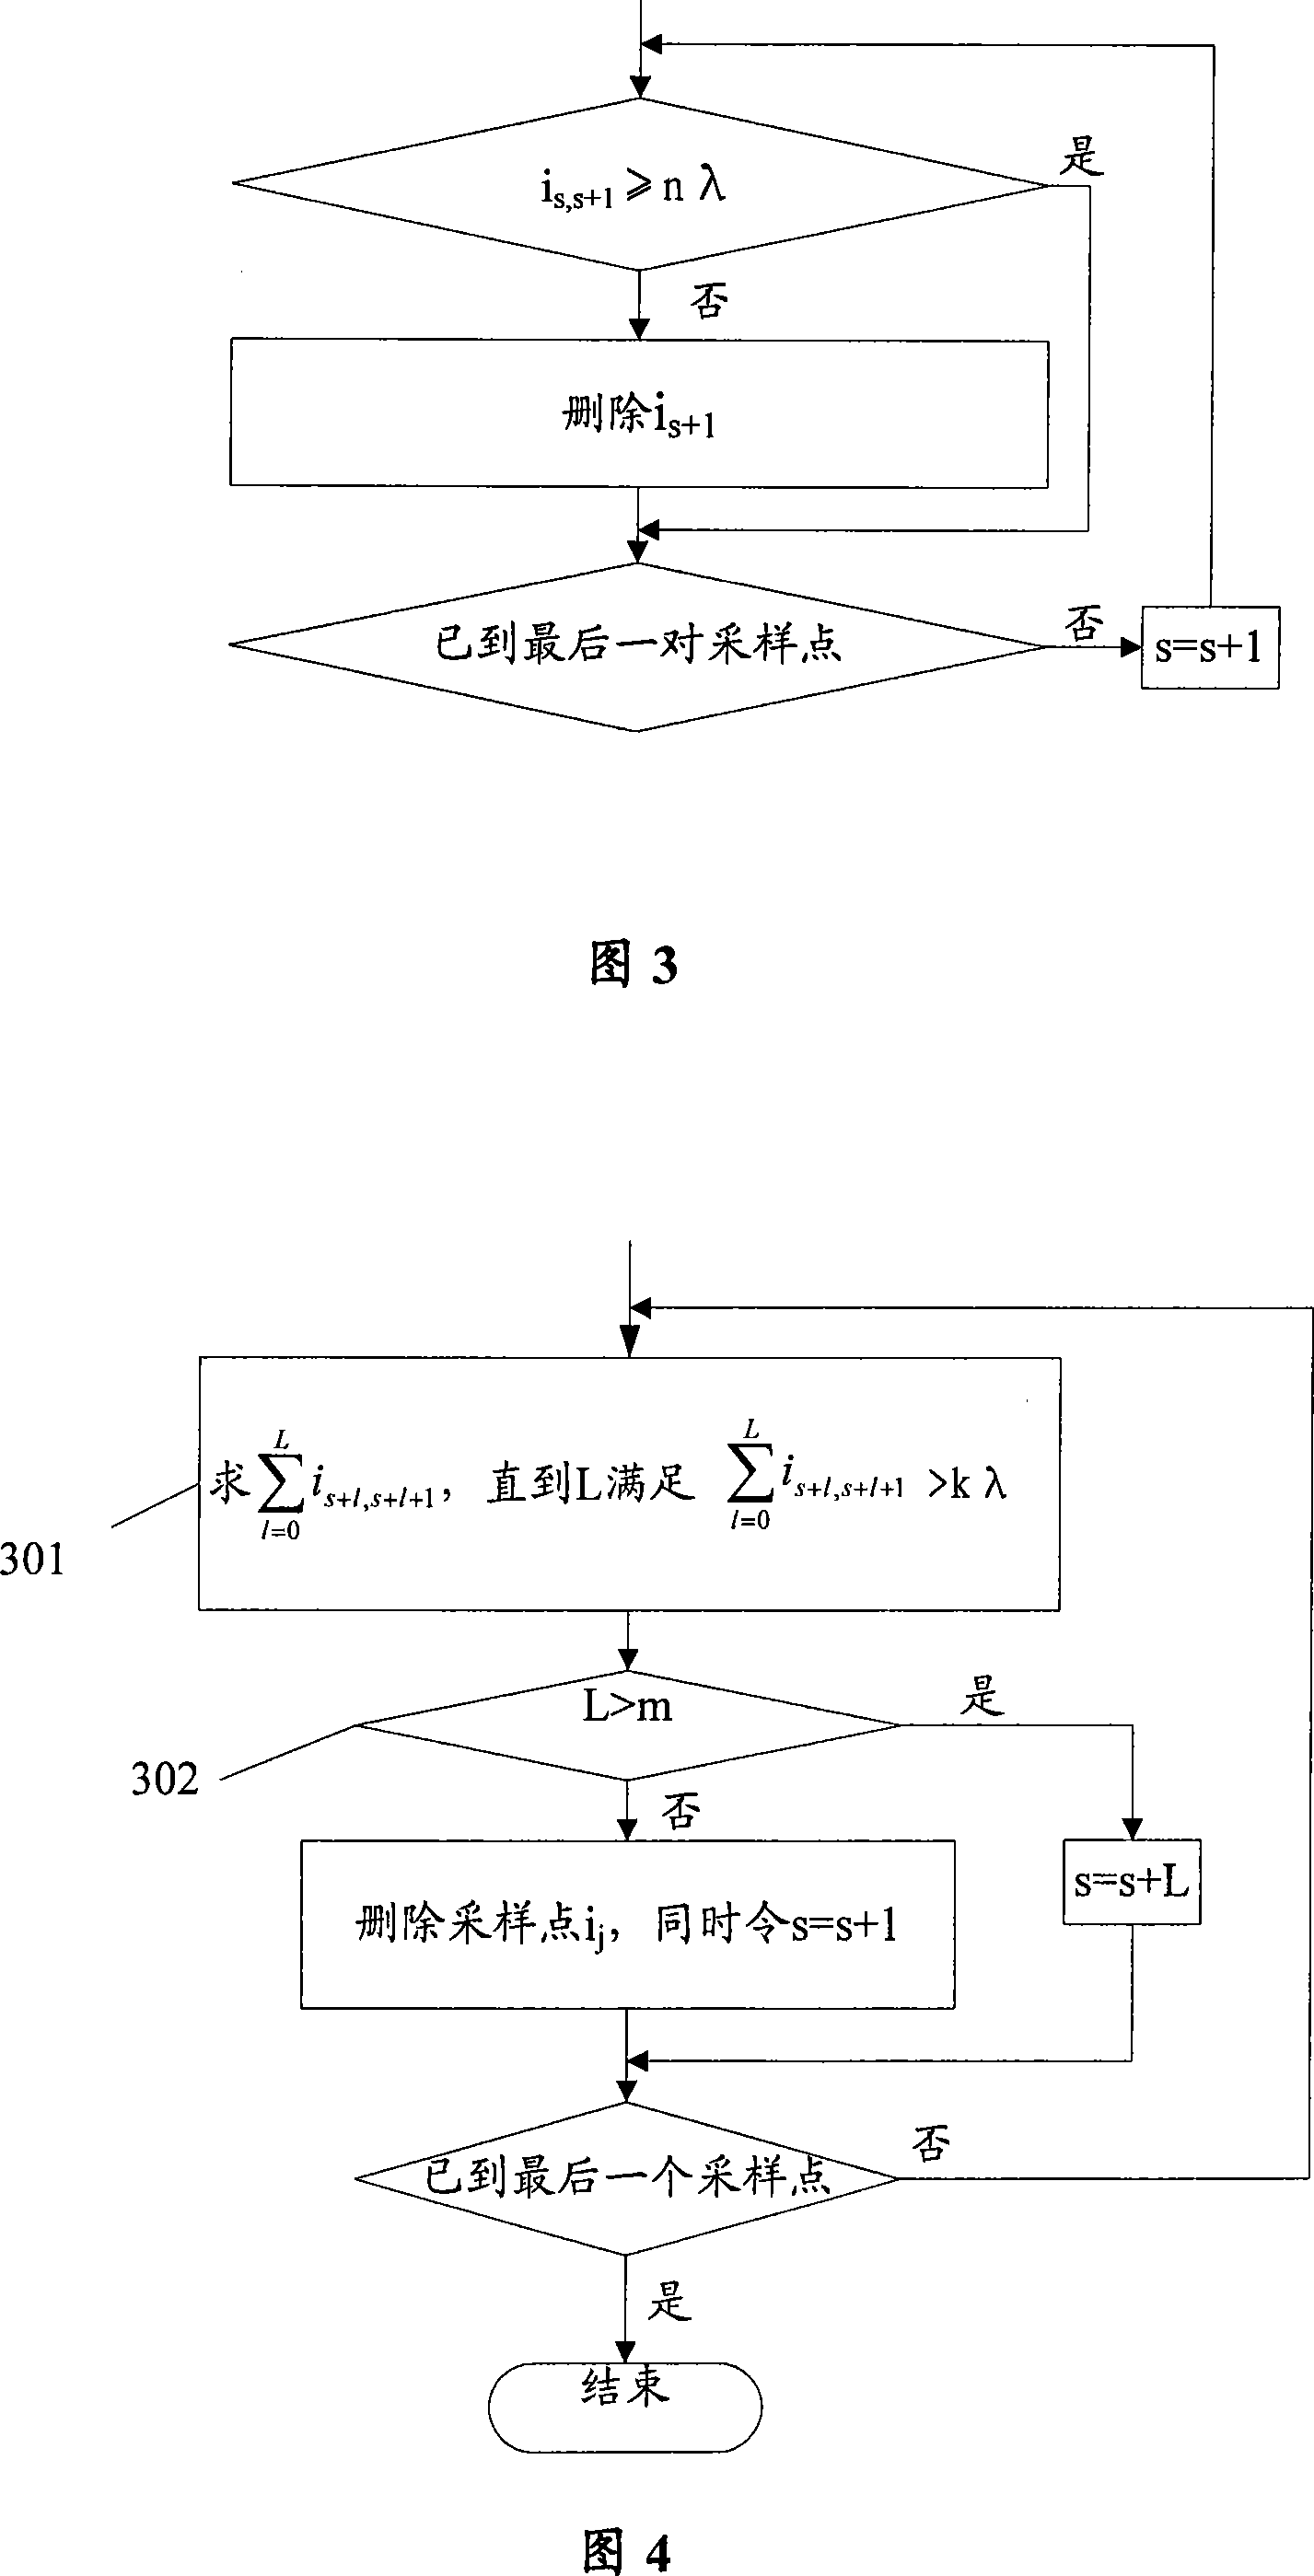 Data processing method and device for continuous wave test of propagation model revision